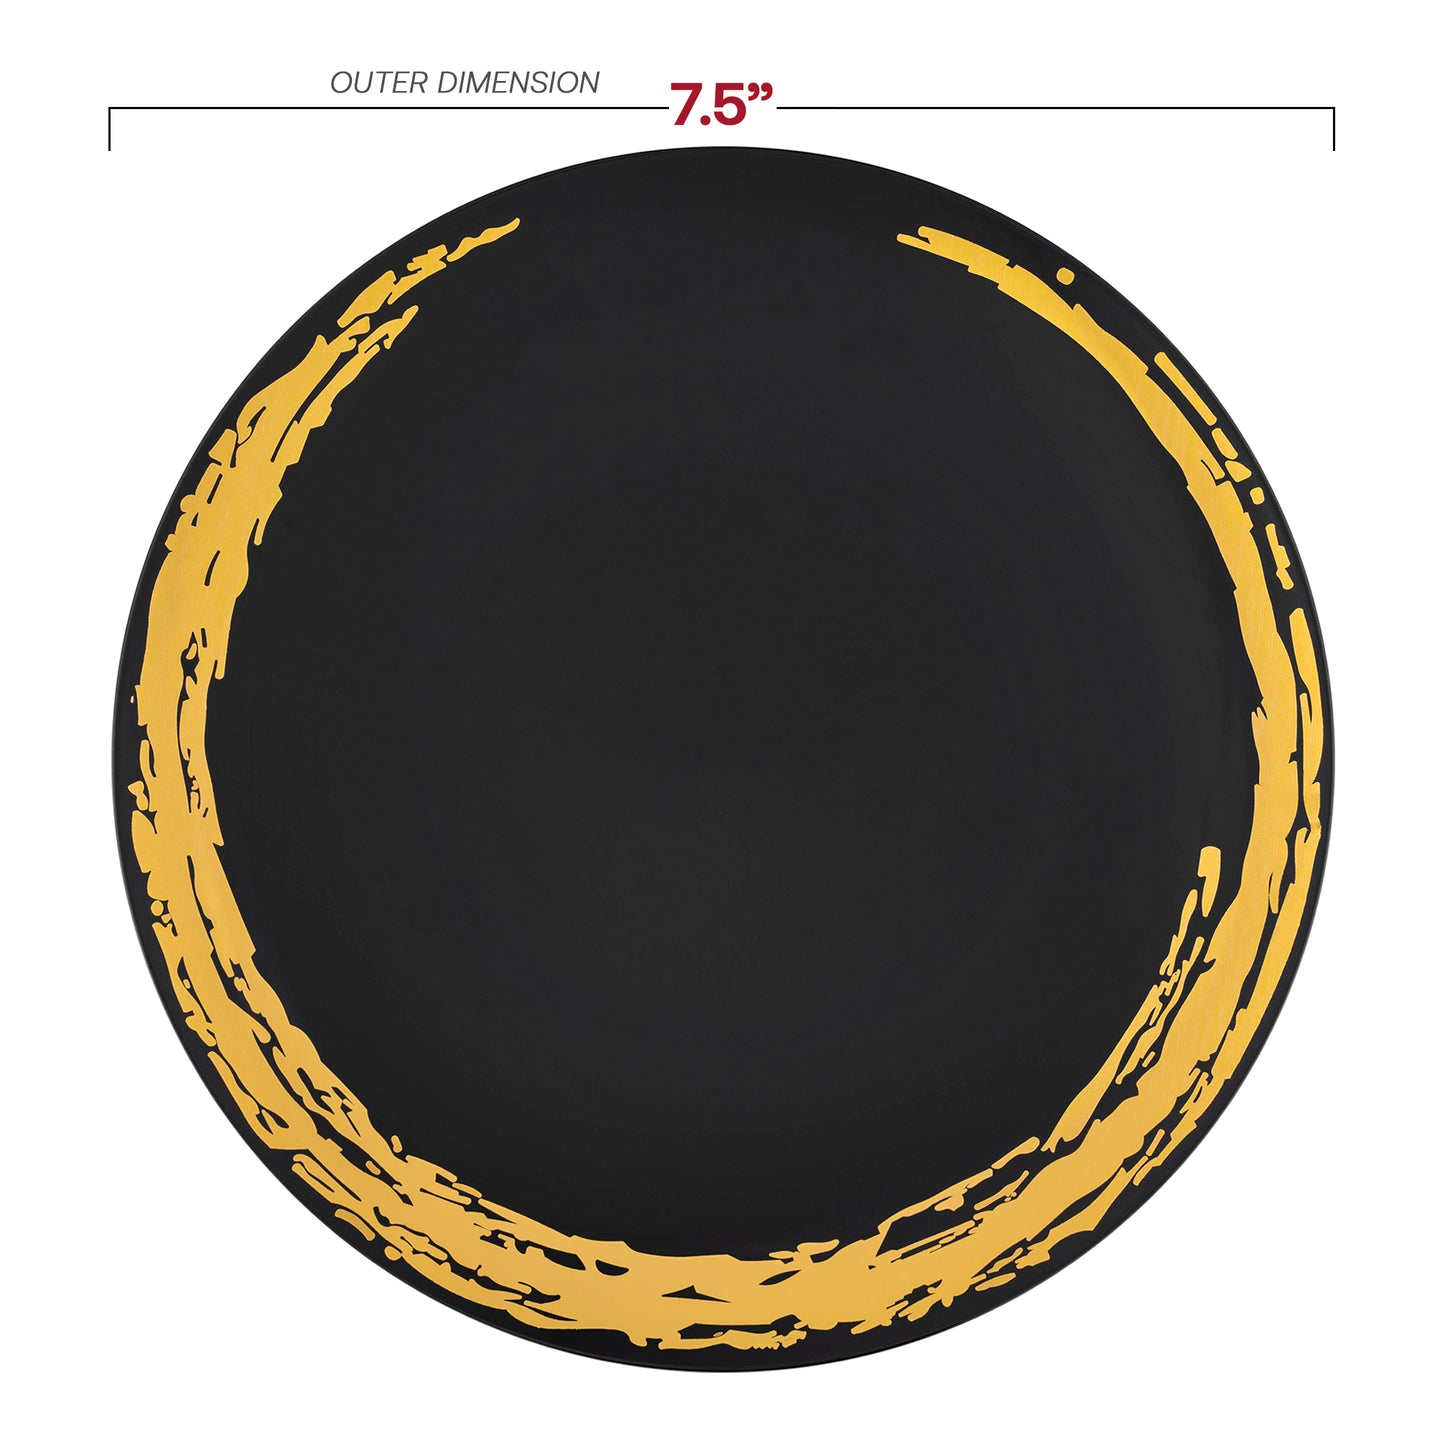 Black with Gold Moonlight Round Disposable Plastic Appetizer/Salad Plates (7.5") Dimension | The Kaya Collection